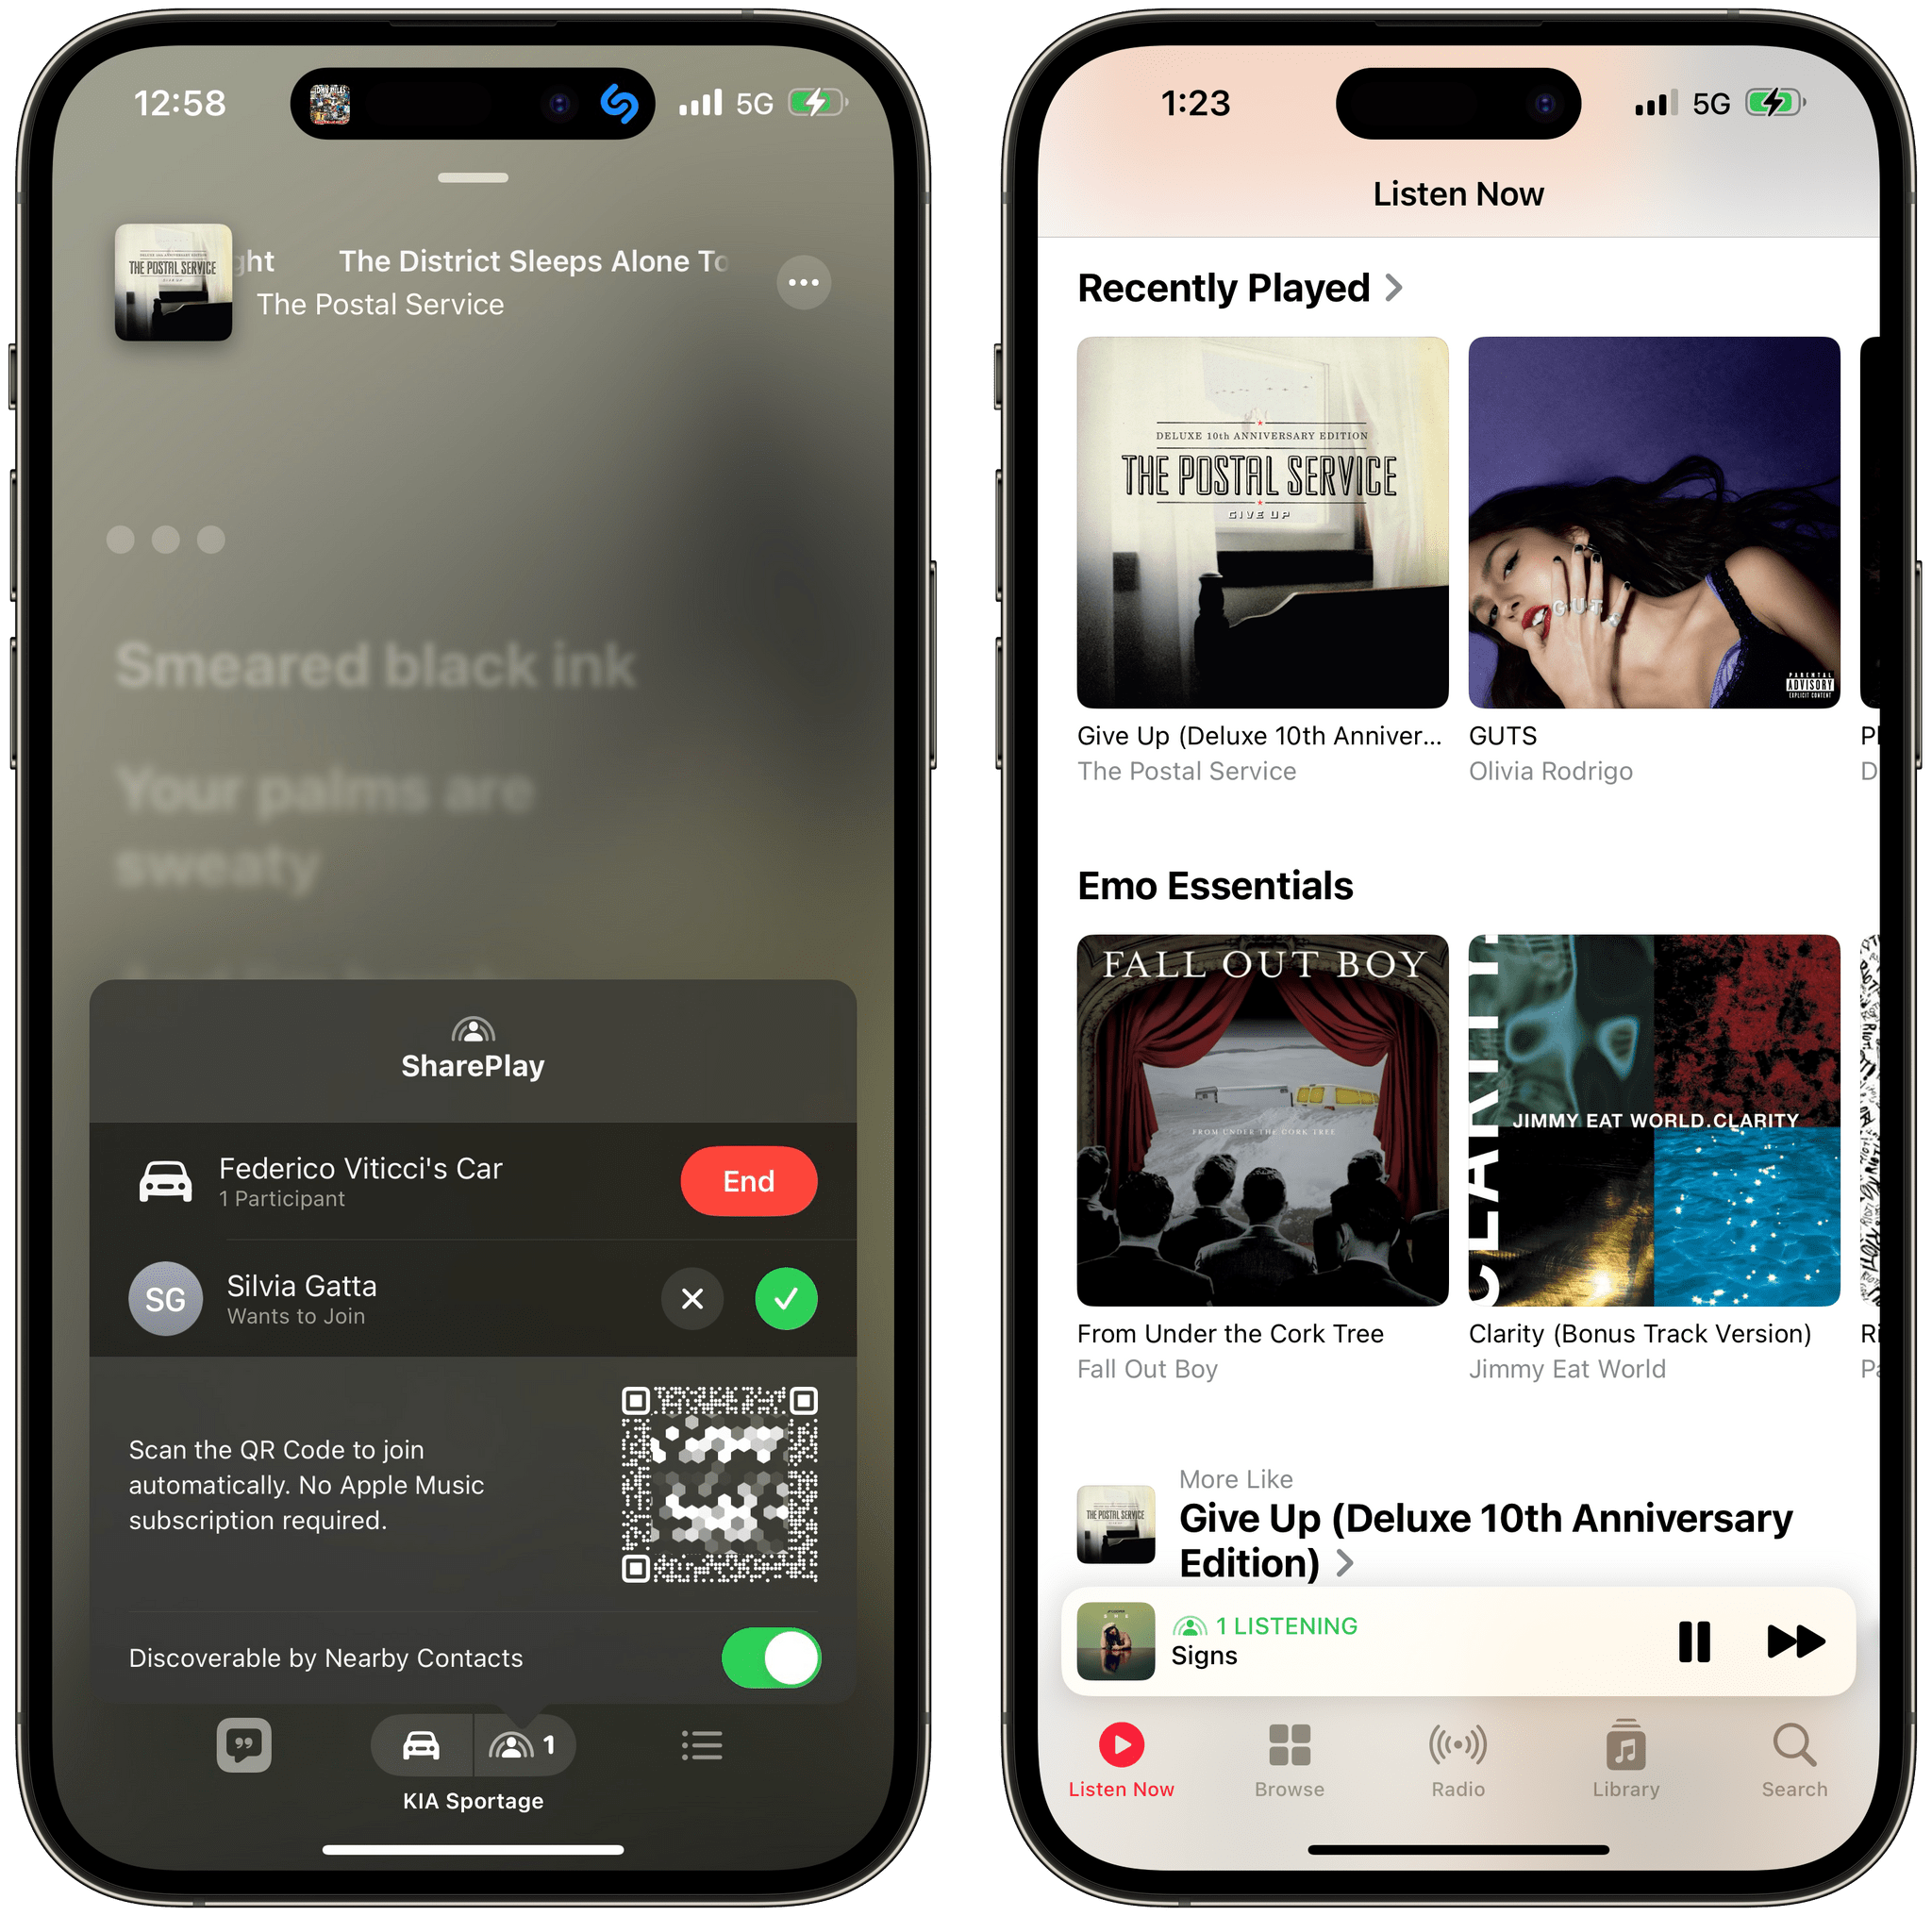 The new SharePlay menu in Apple Music (left) lets other people join by scanning a QR code. Once they've joined, you'll see a green indicator in the mini player at the bottom.